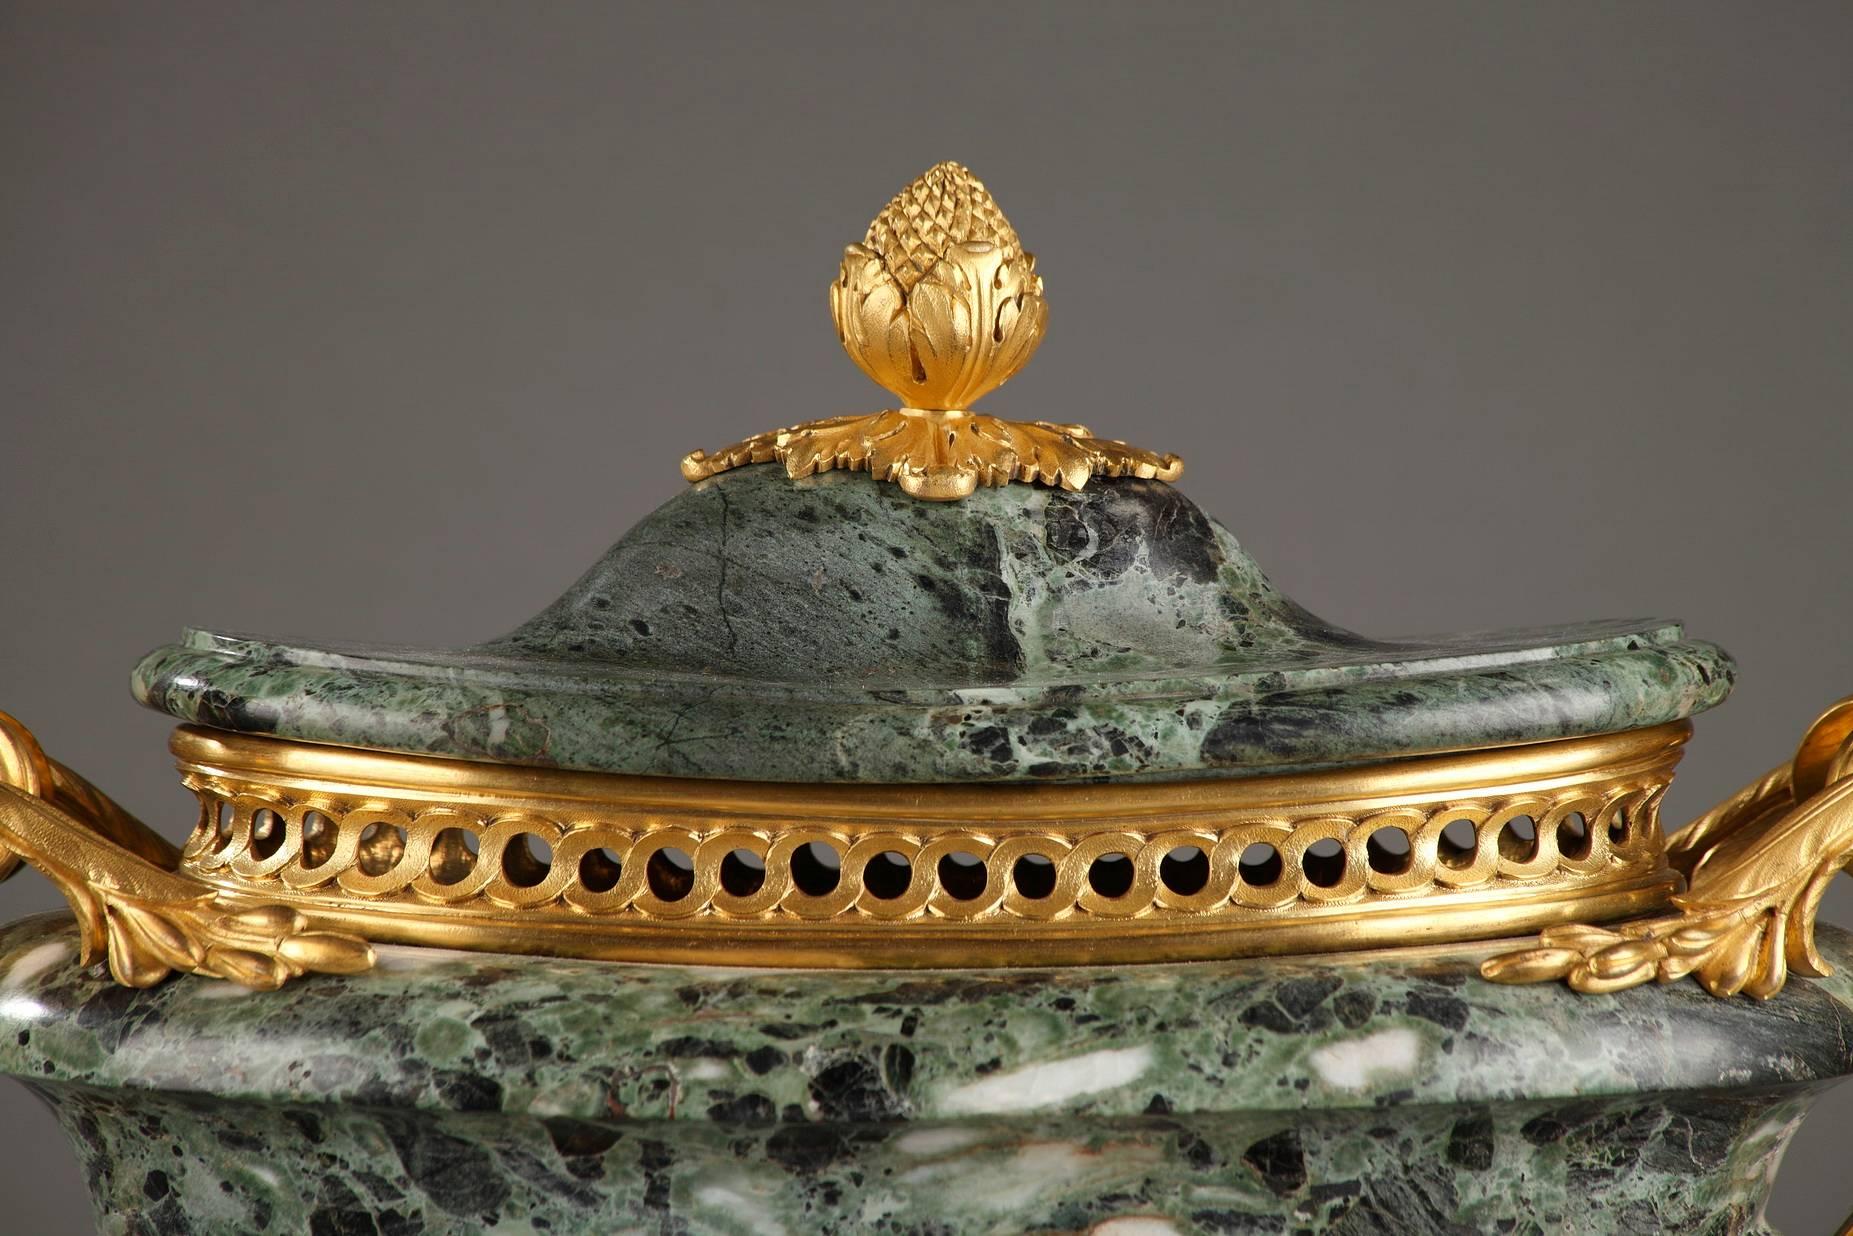 Green marble, ormolu-mounted incense holder on a gilt bronze, square plinth. A pine cone serves as a handle for the lid, which rests on an openwork, interlacing frieze. Two handles which culminate in scrolling foliage run down the sides to the top